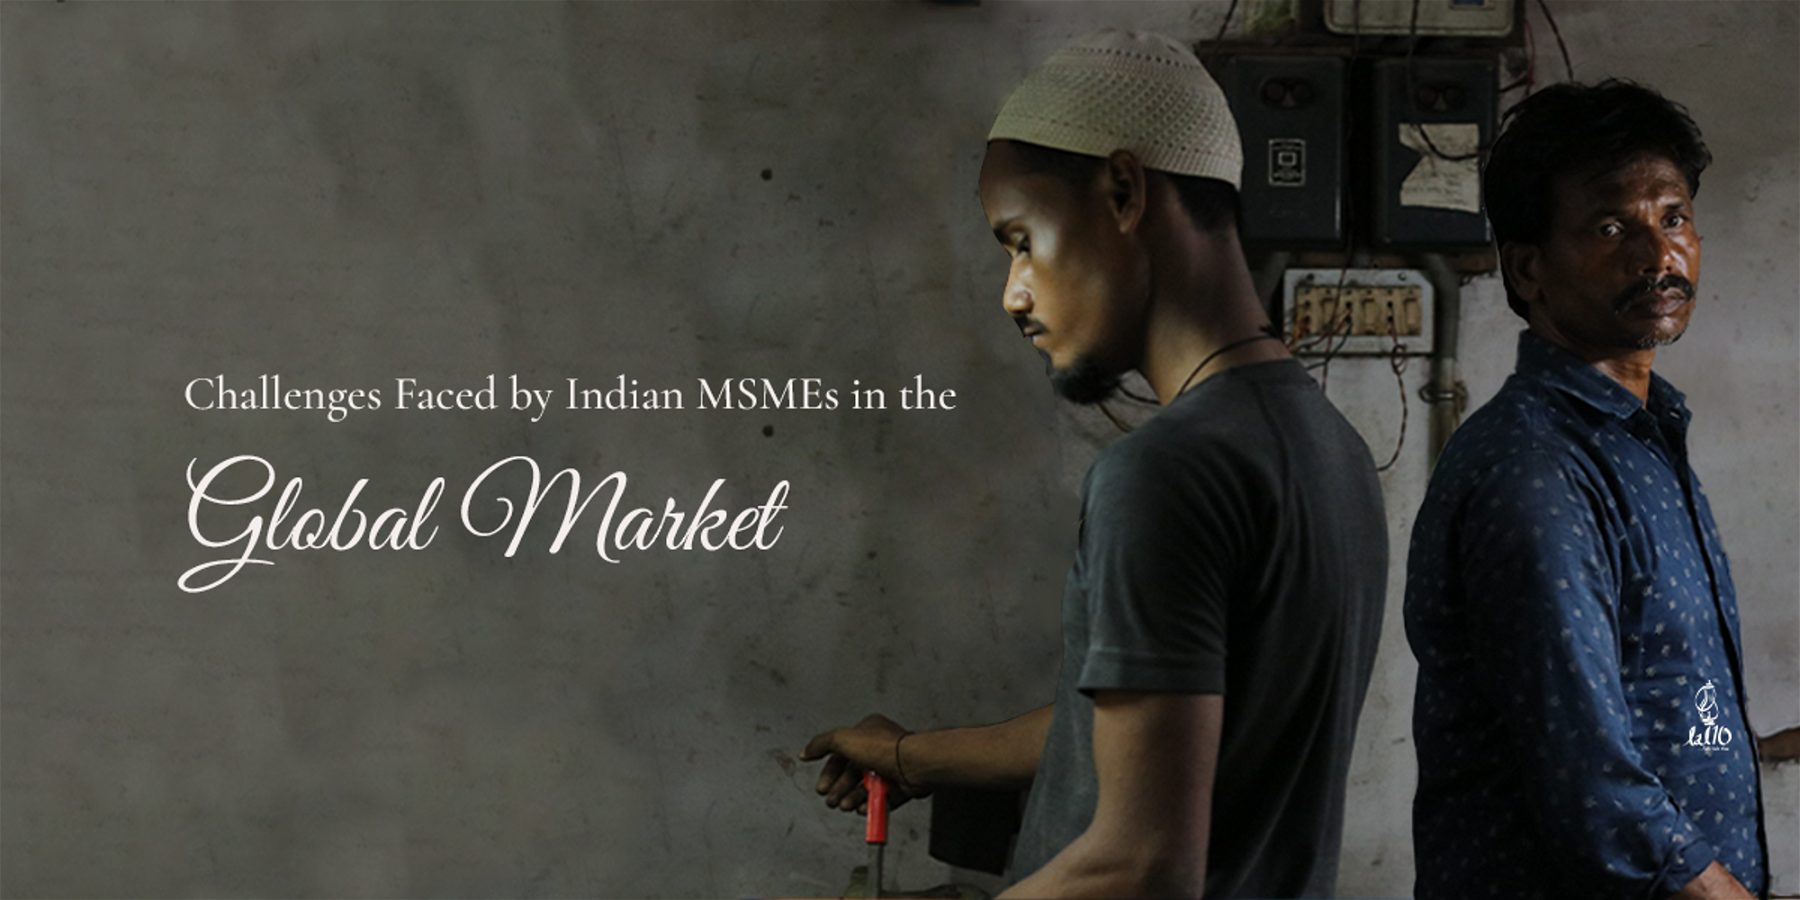 Challenges Faced by Indian MSMEs in the Global Market